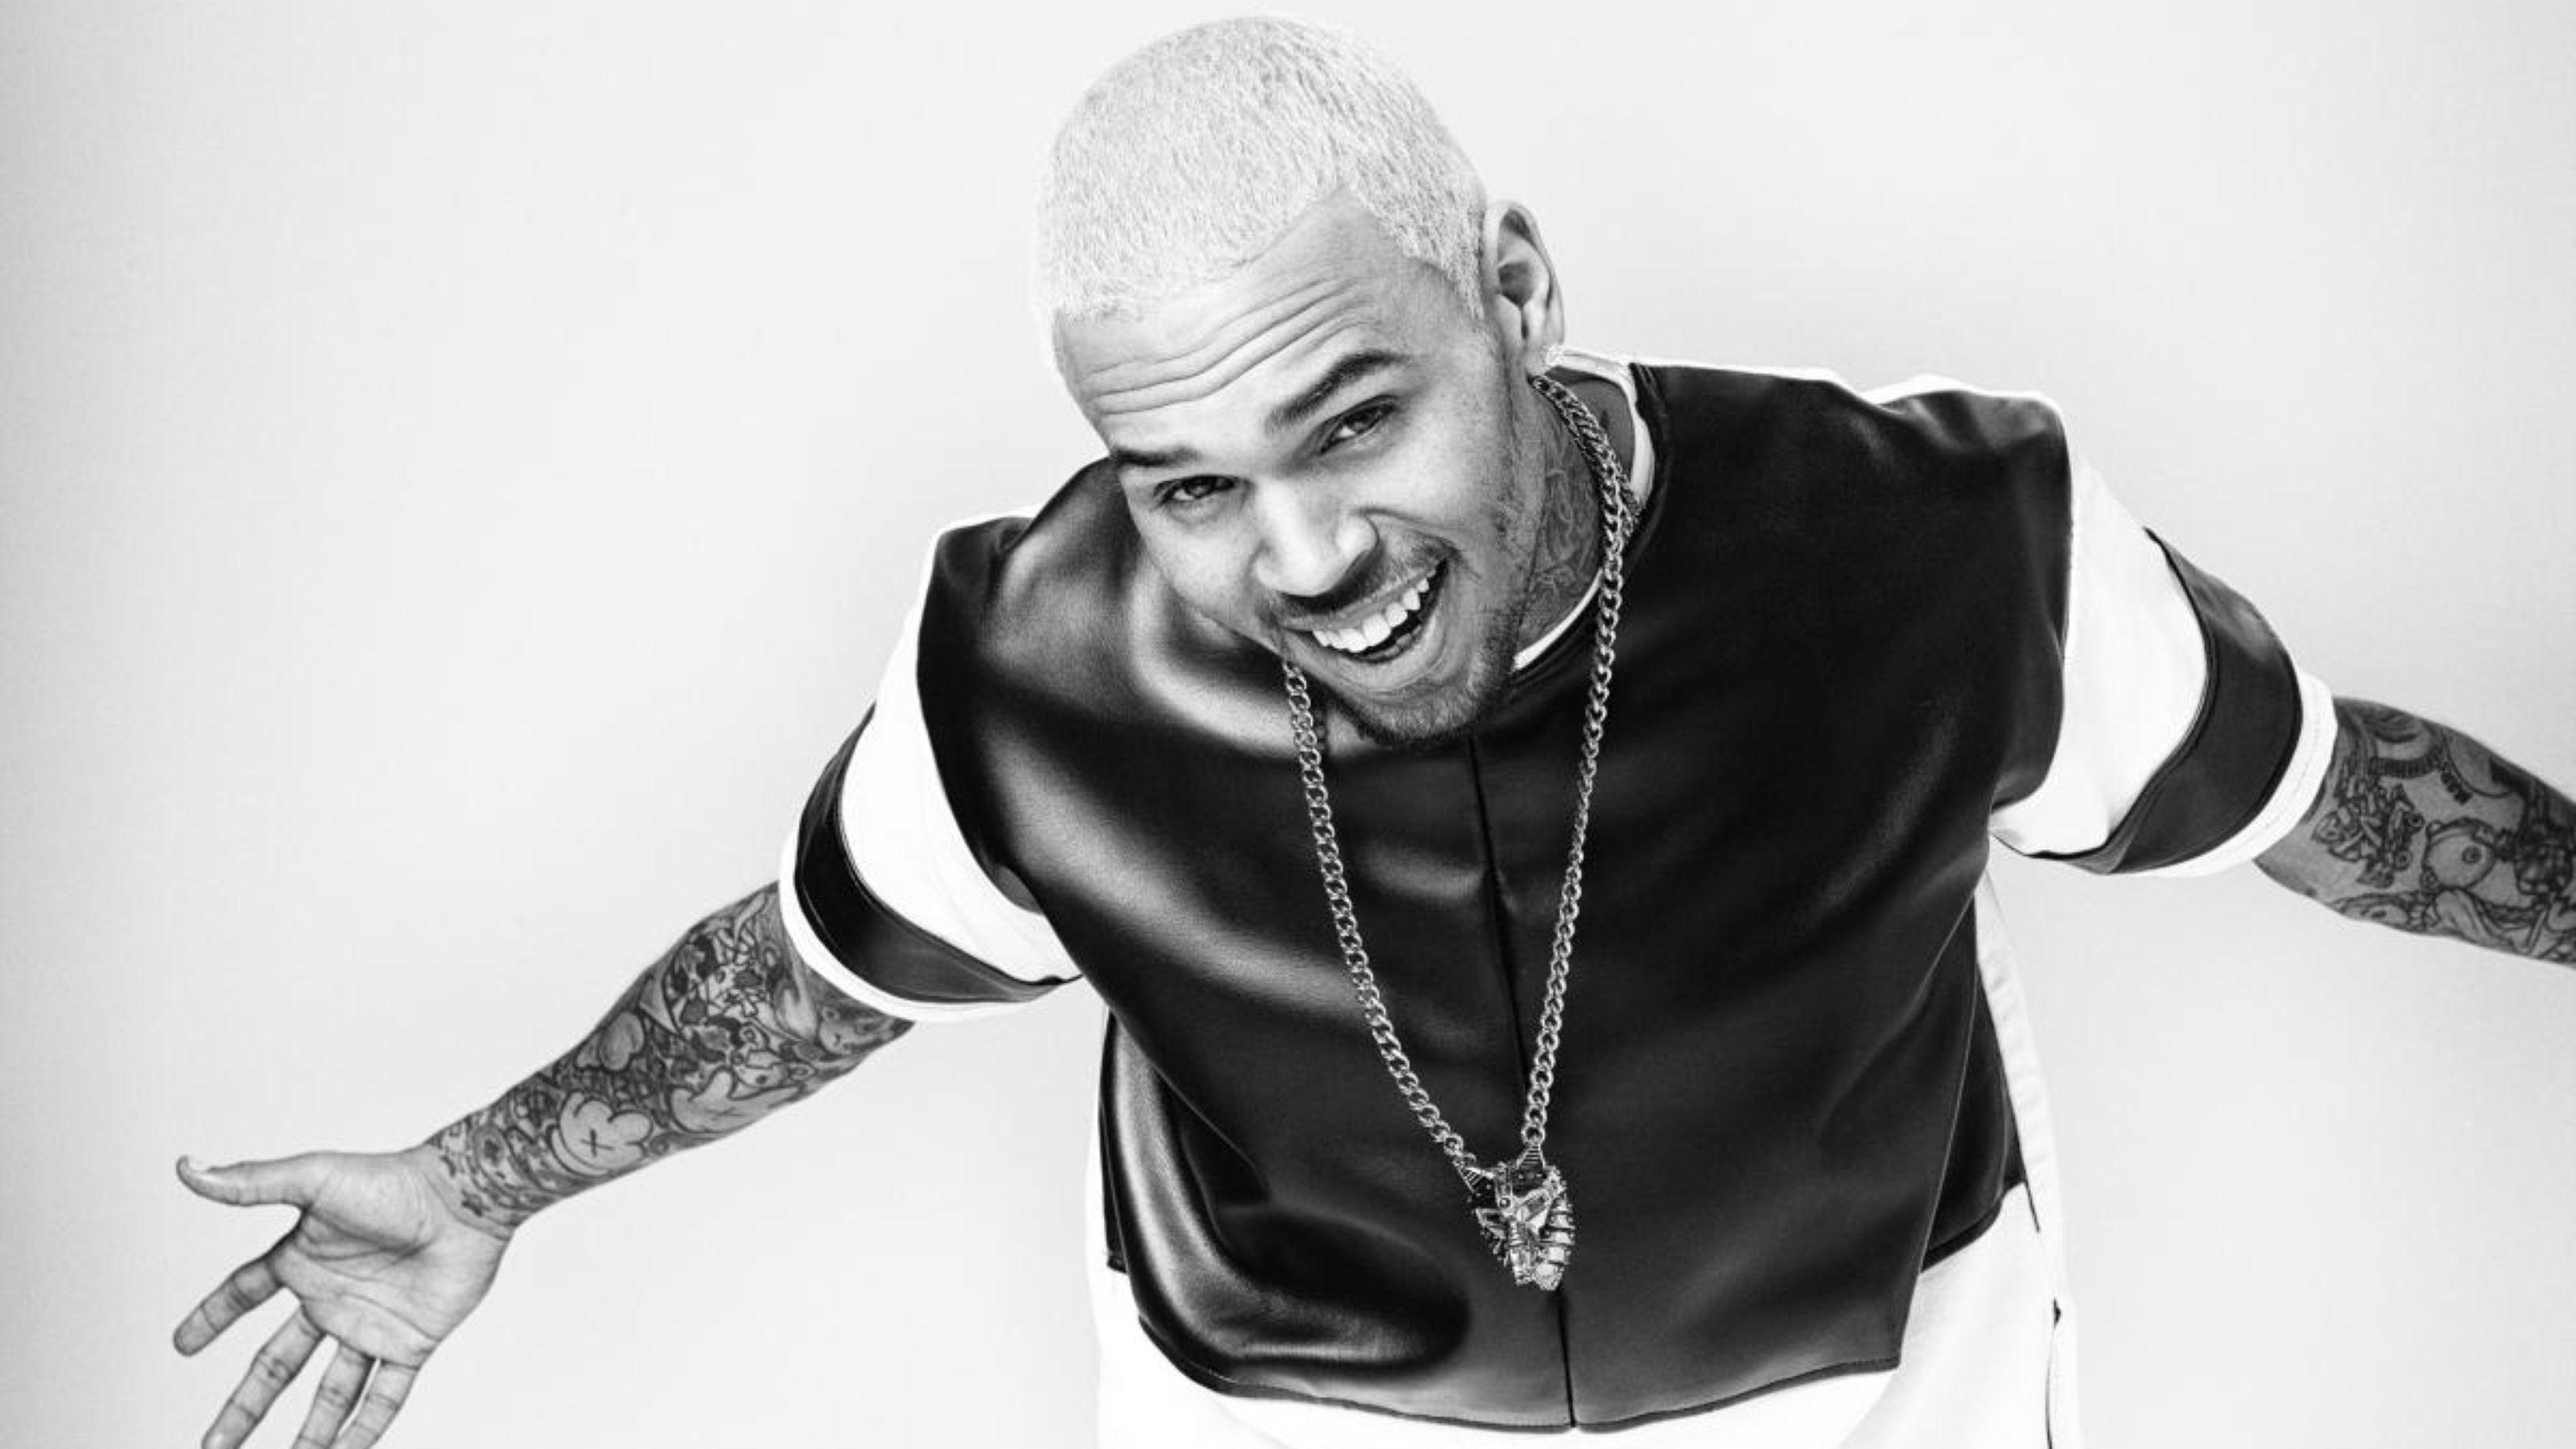 Chris Brown Wallpapers 75 images